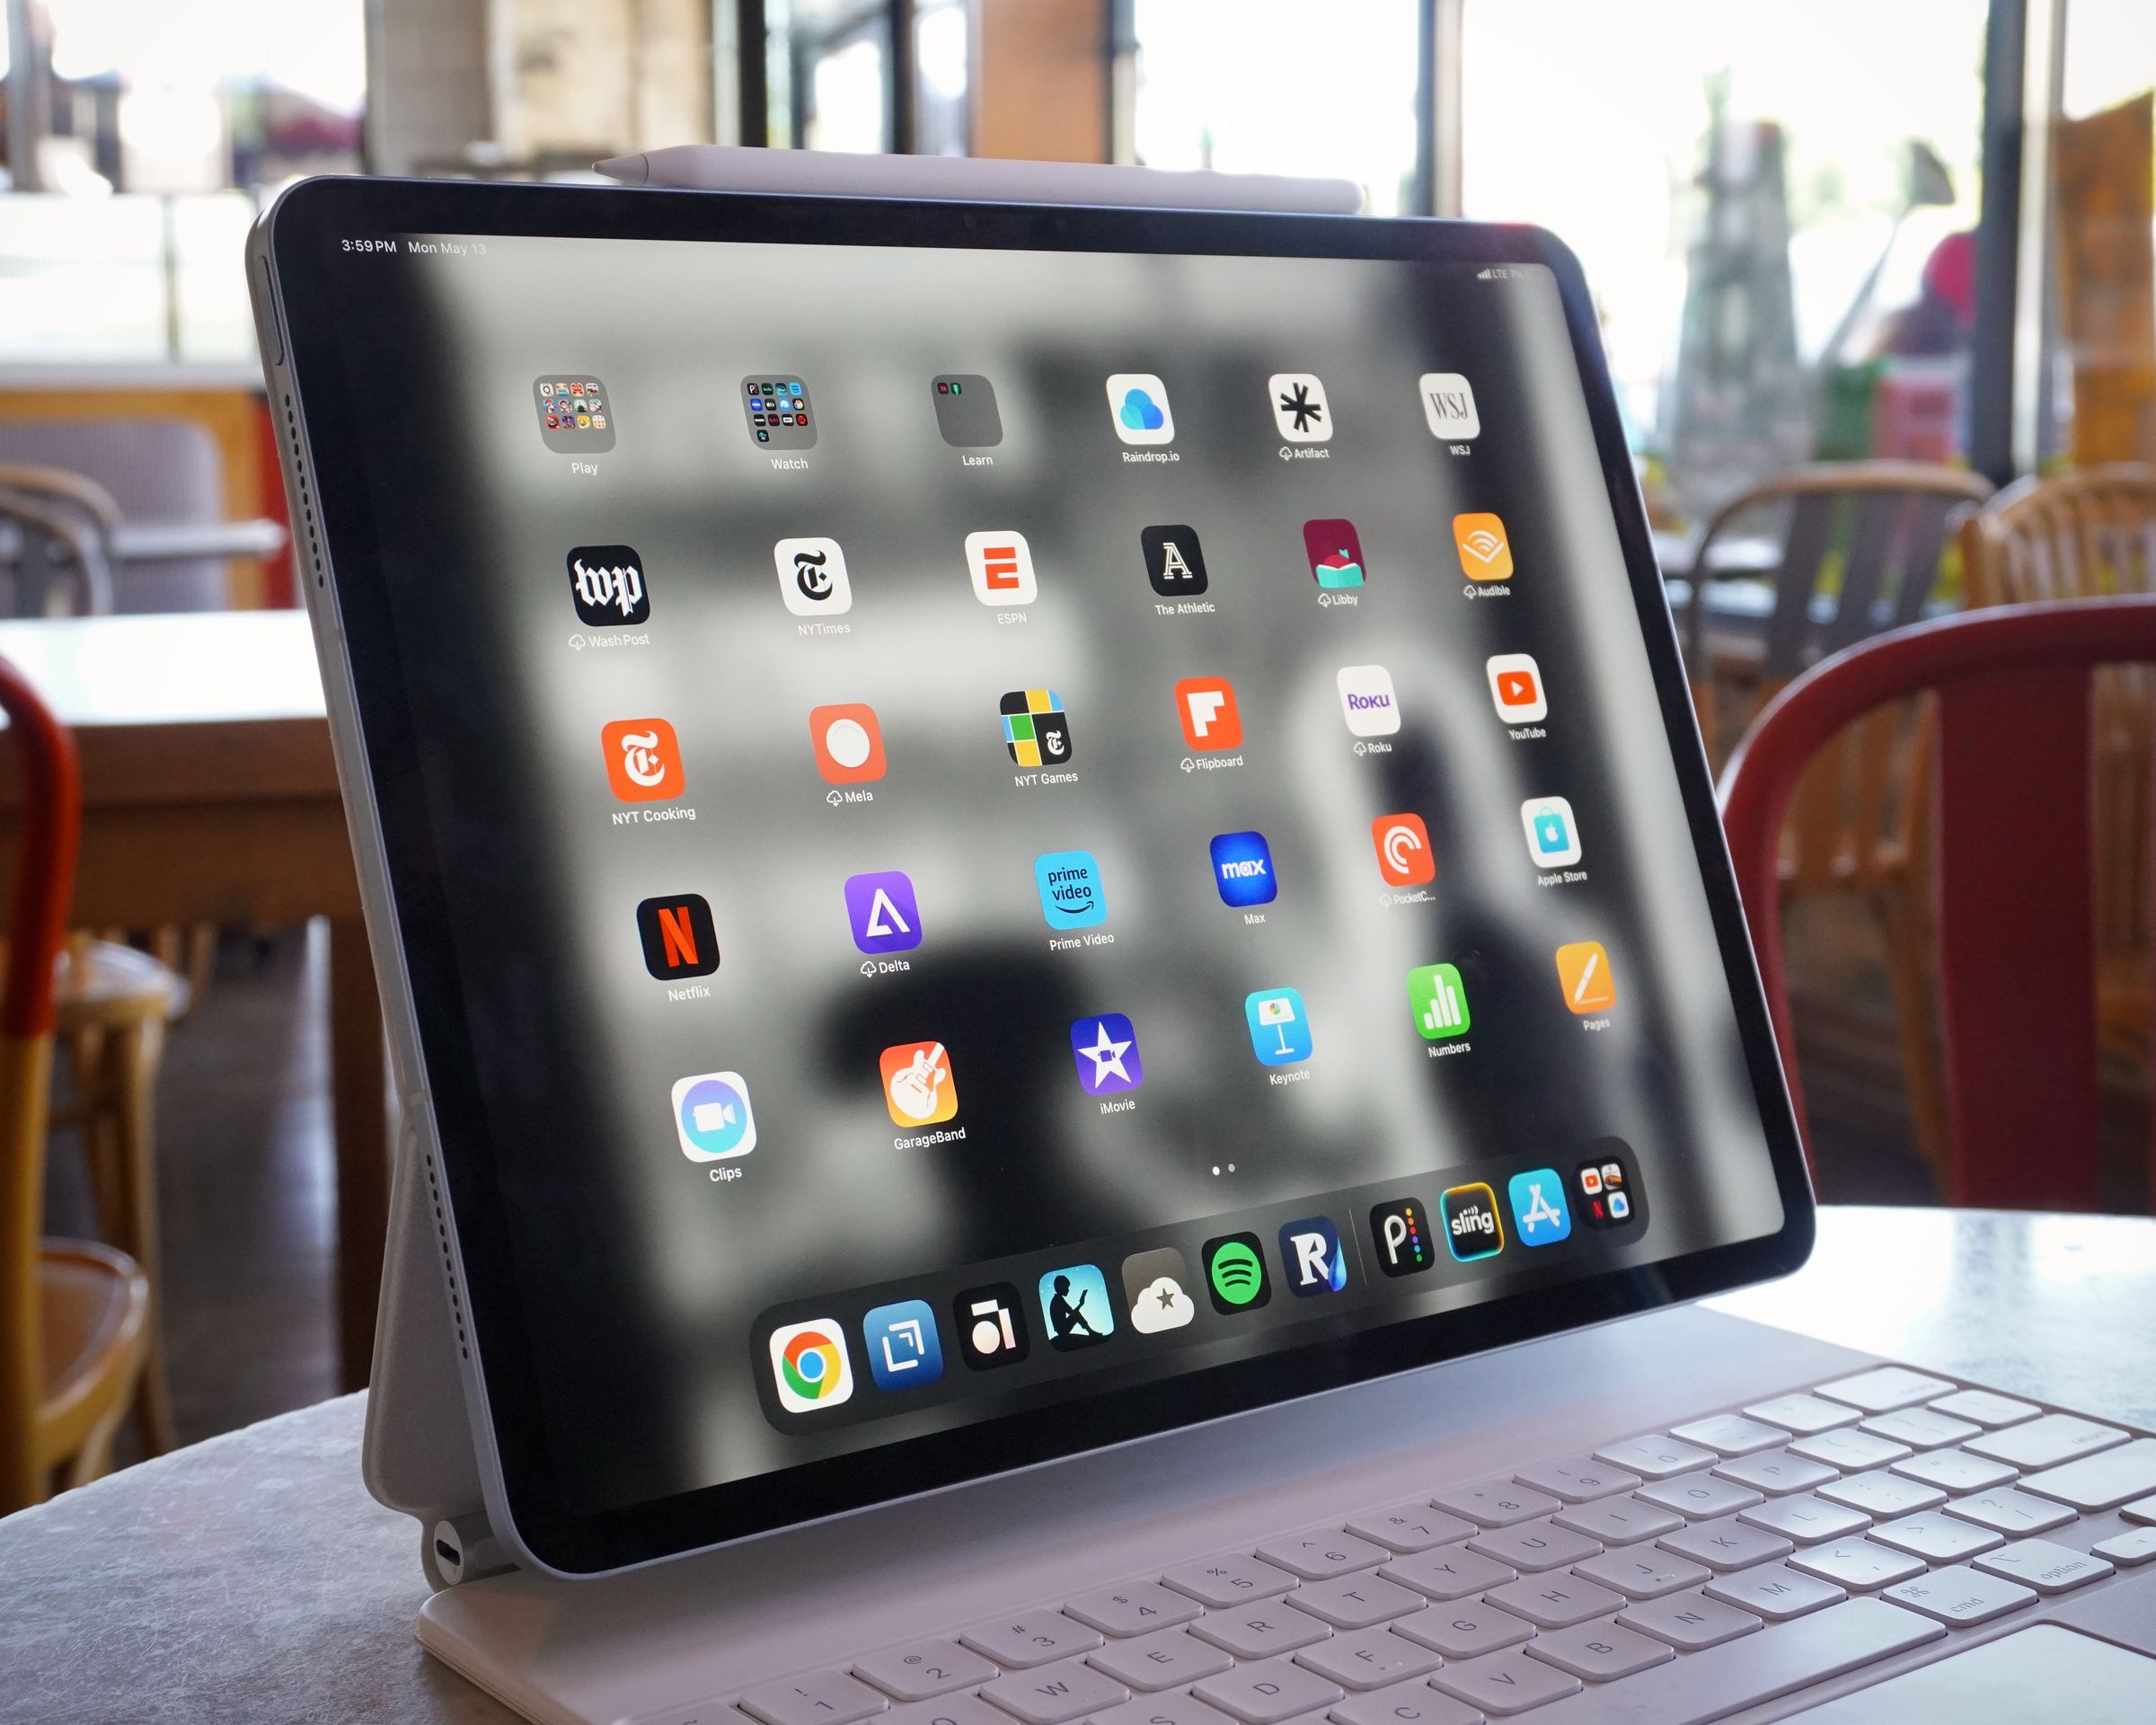 A photo of the iPad Air in a cafe setting.